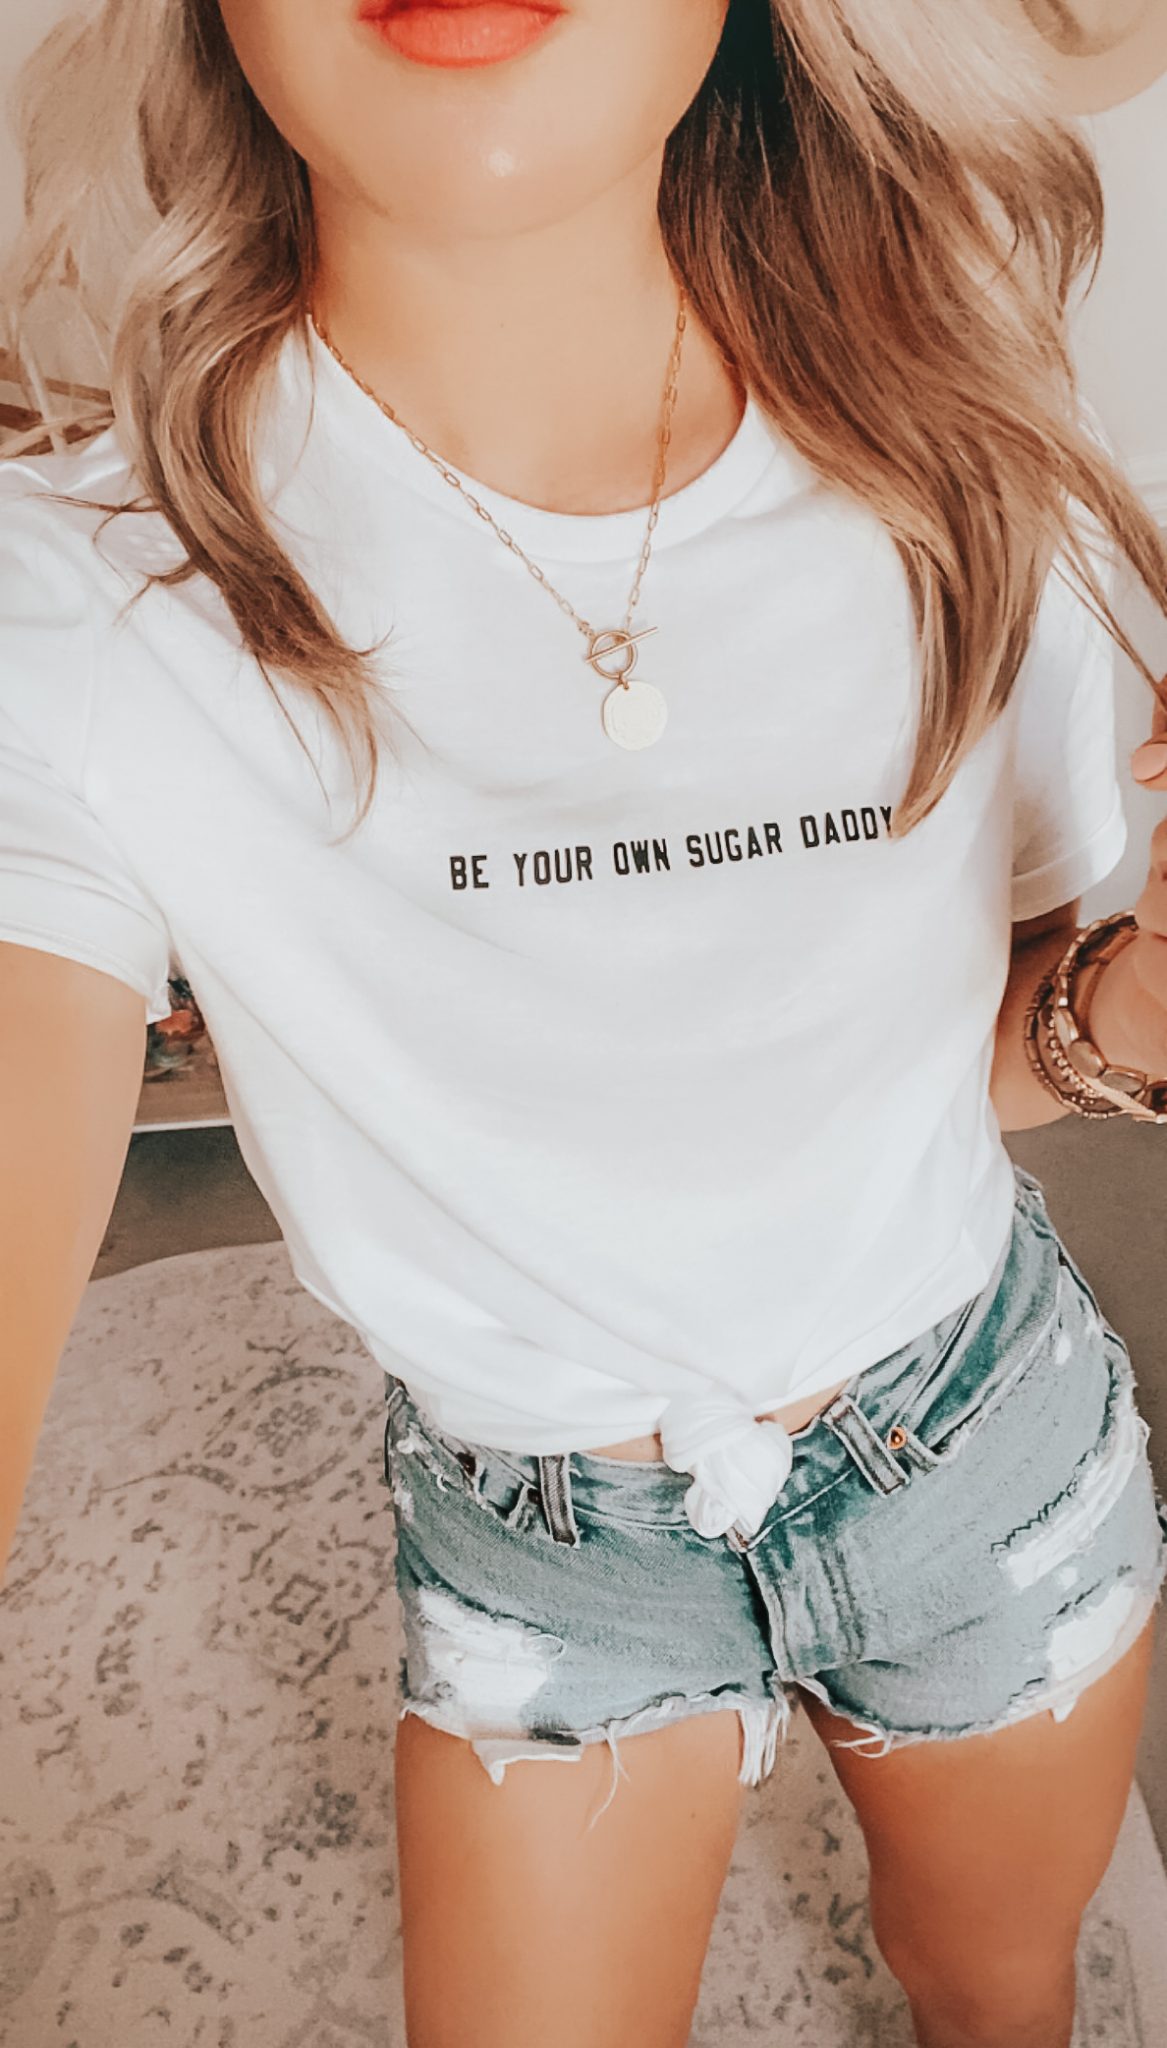 Be Your Own Sugar Daddy - Kayla Makes